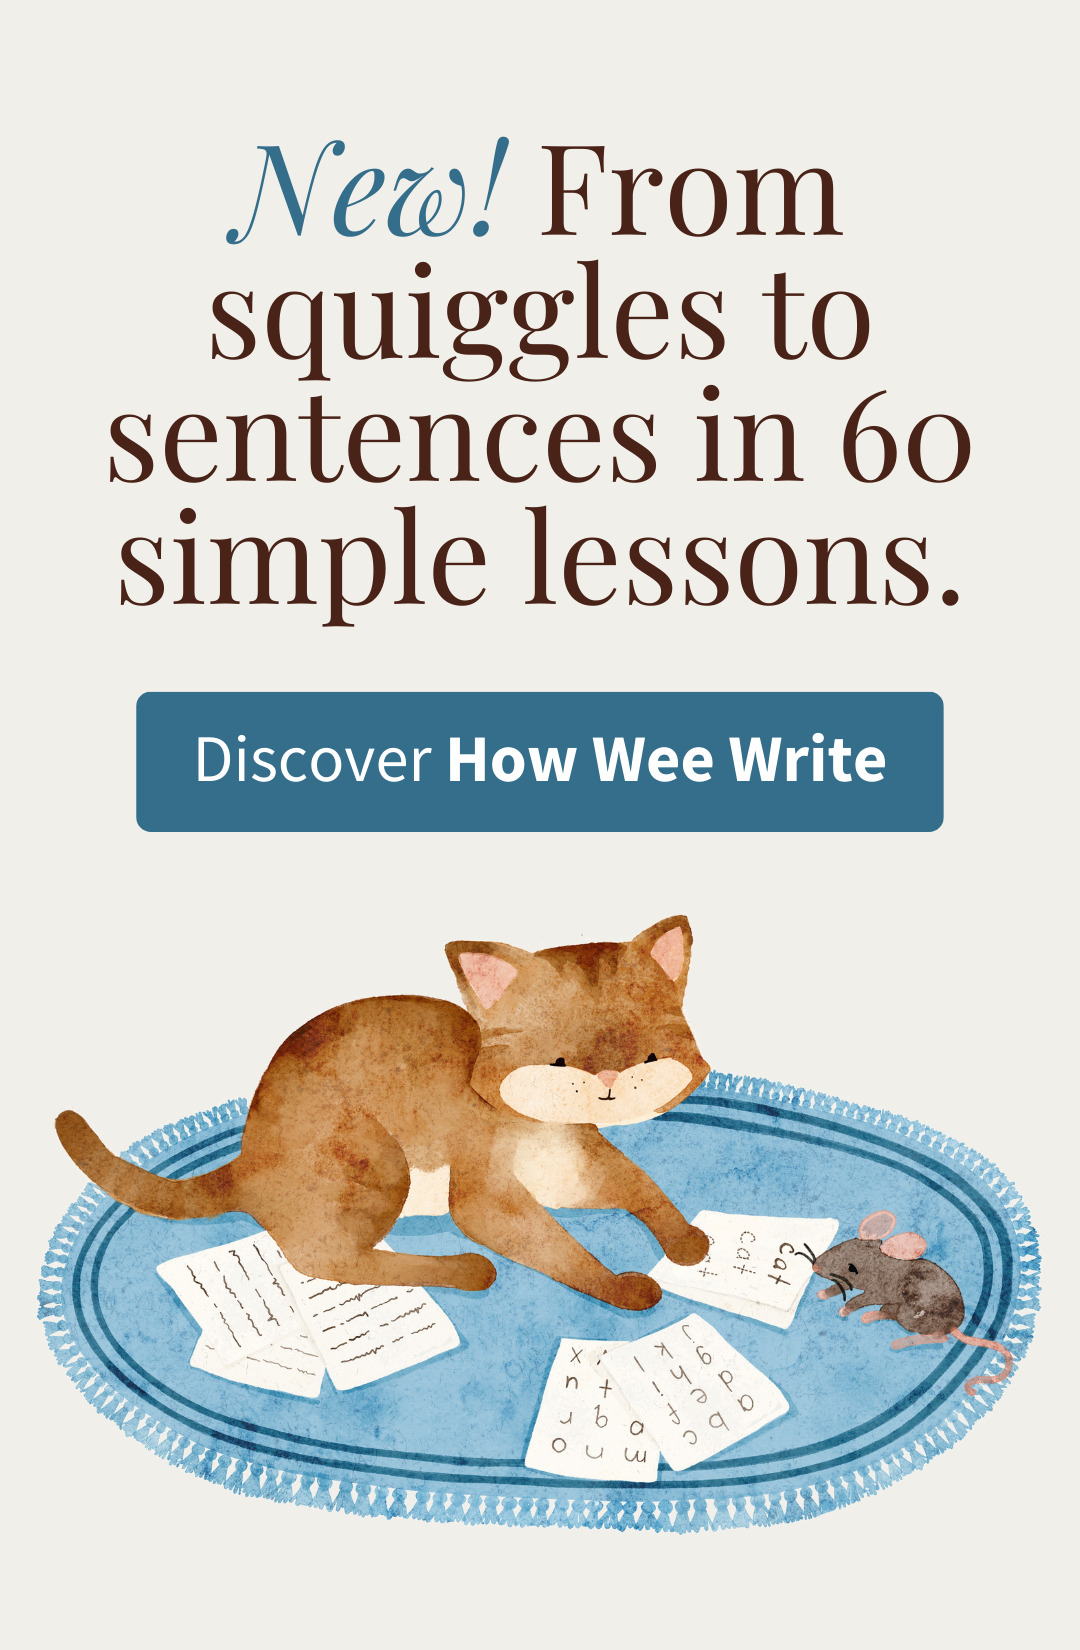 New! From squiggles to sentences in 60 simple lessons. Discover How Wee Write